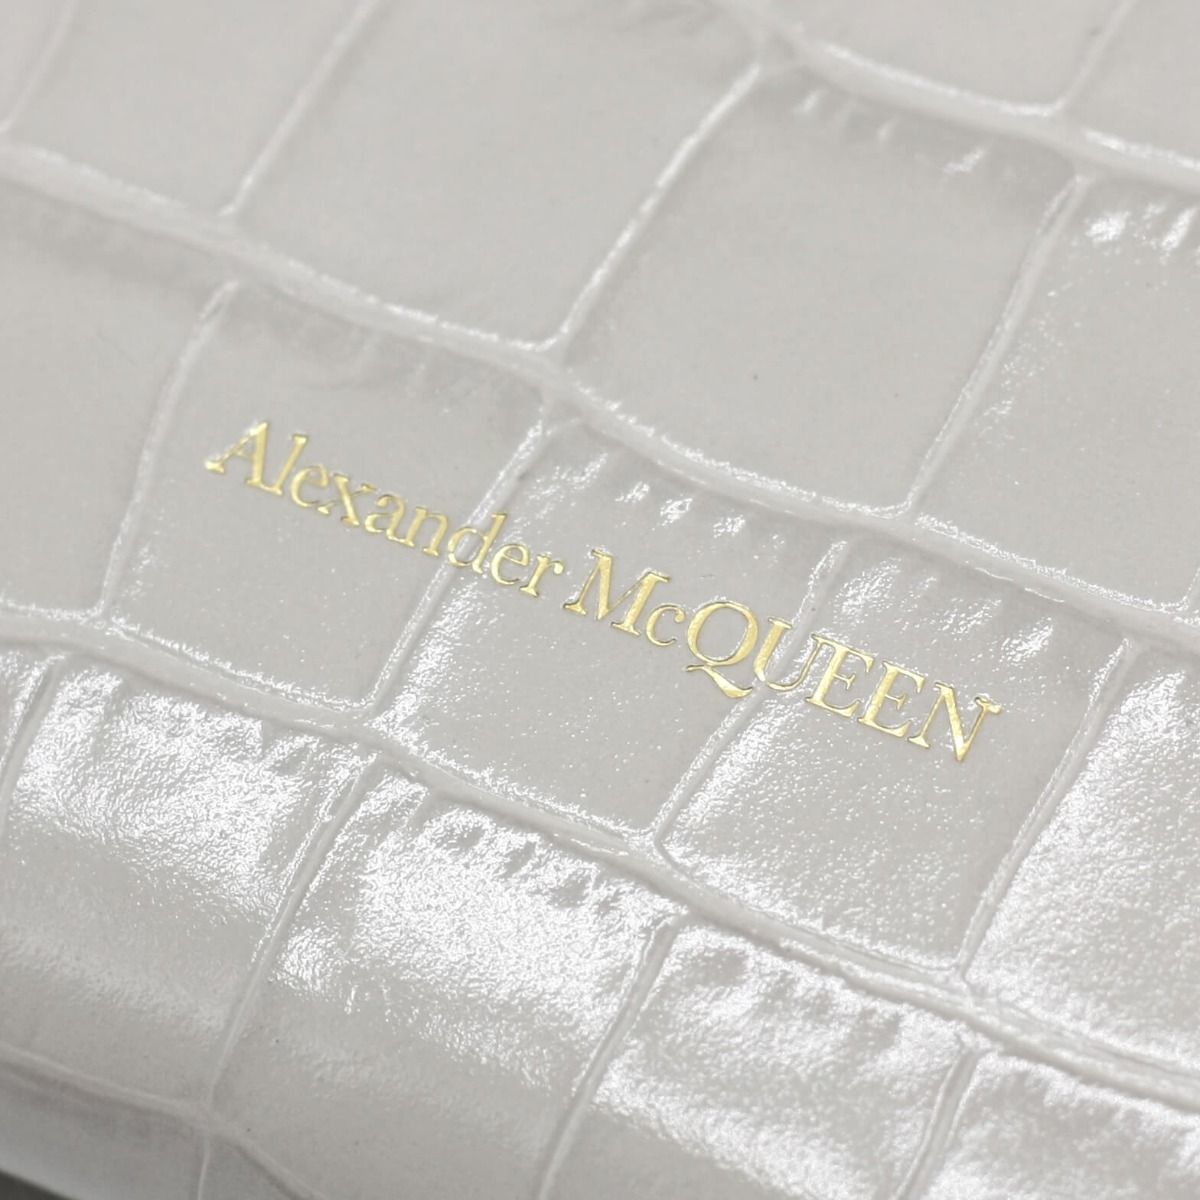 Alexander McQueen Embossed Leather Bag (removable strap)